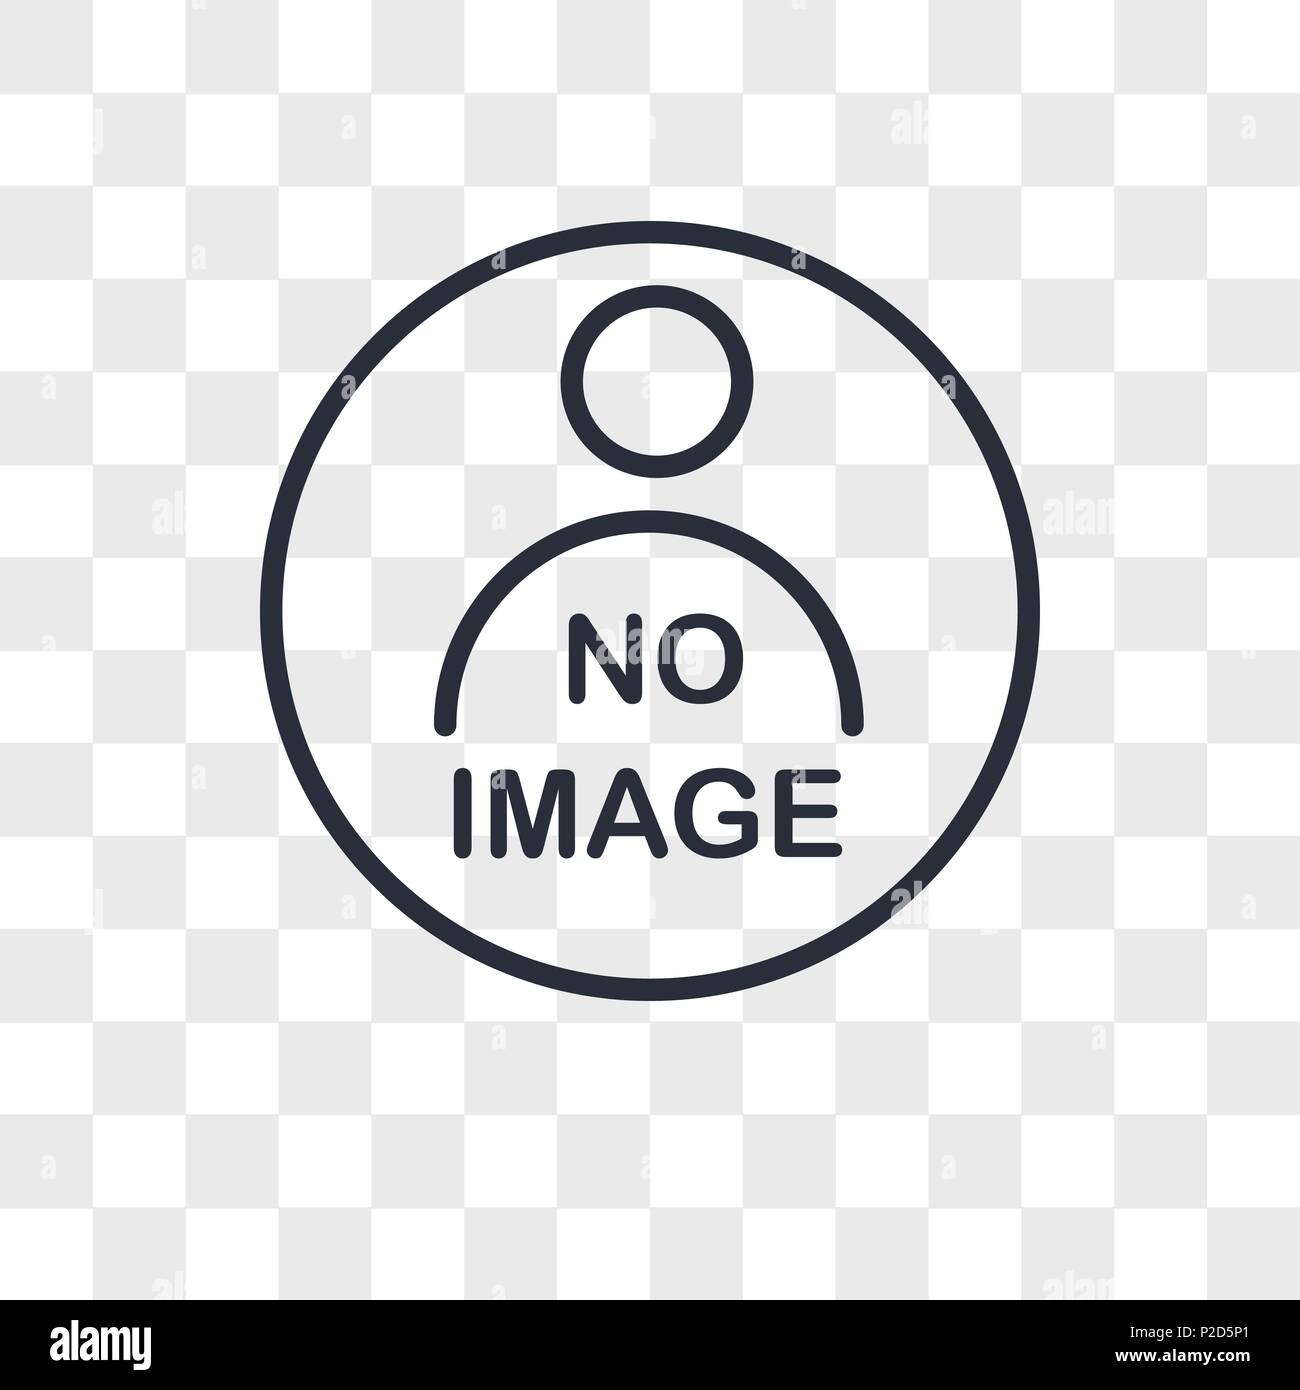 Download photo not available vector icon isolated on transparent ...